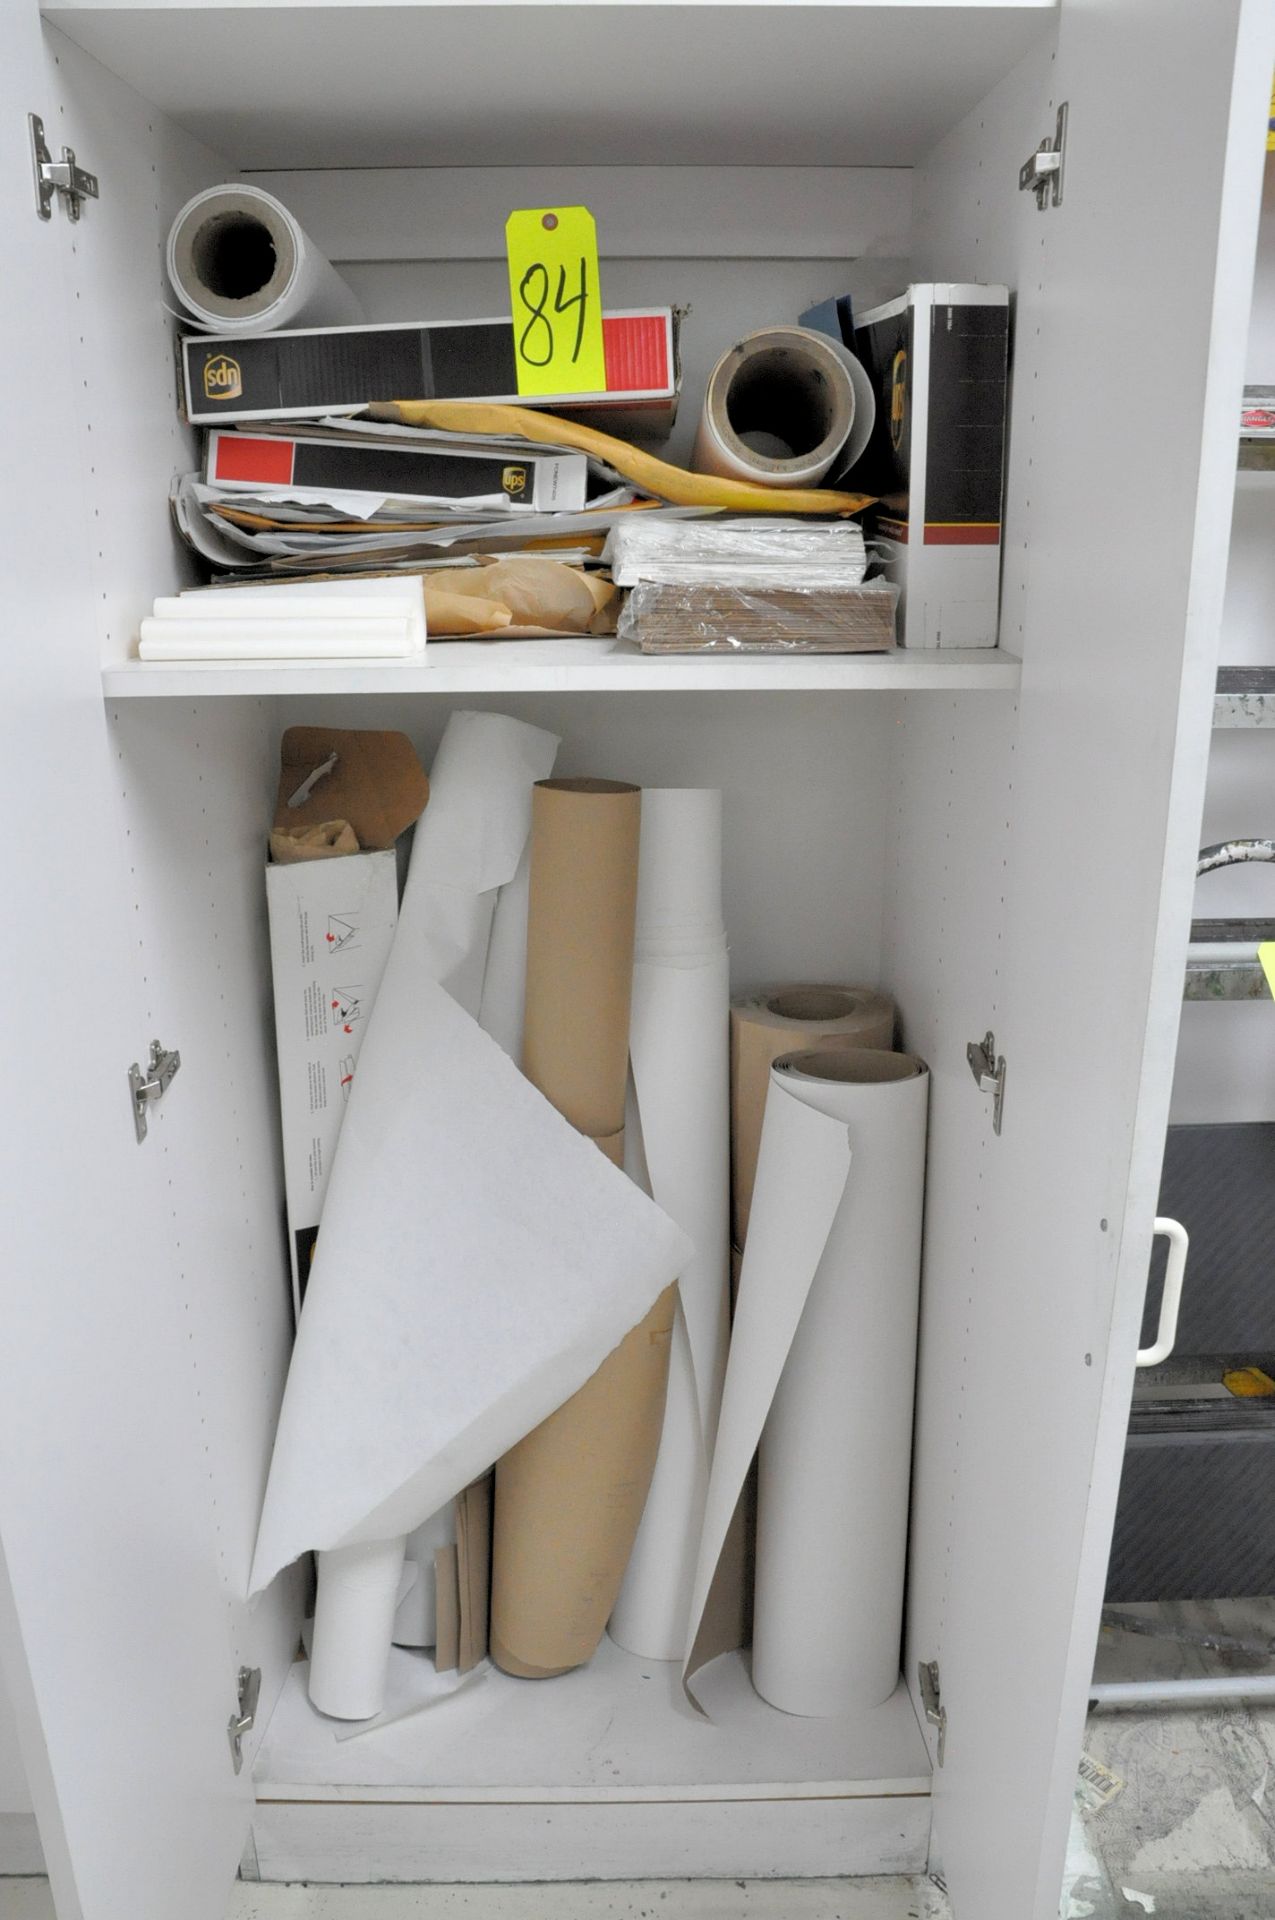 Lot-Shipping Supplies in (2) Cabinets, (Cabinets Not Included), with Drum of Styrofoam Peanuts